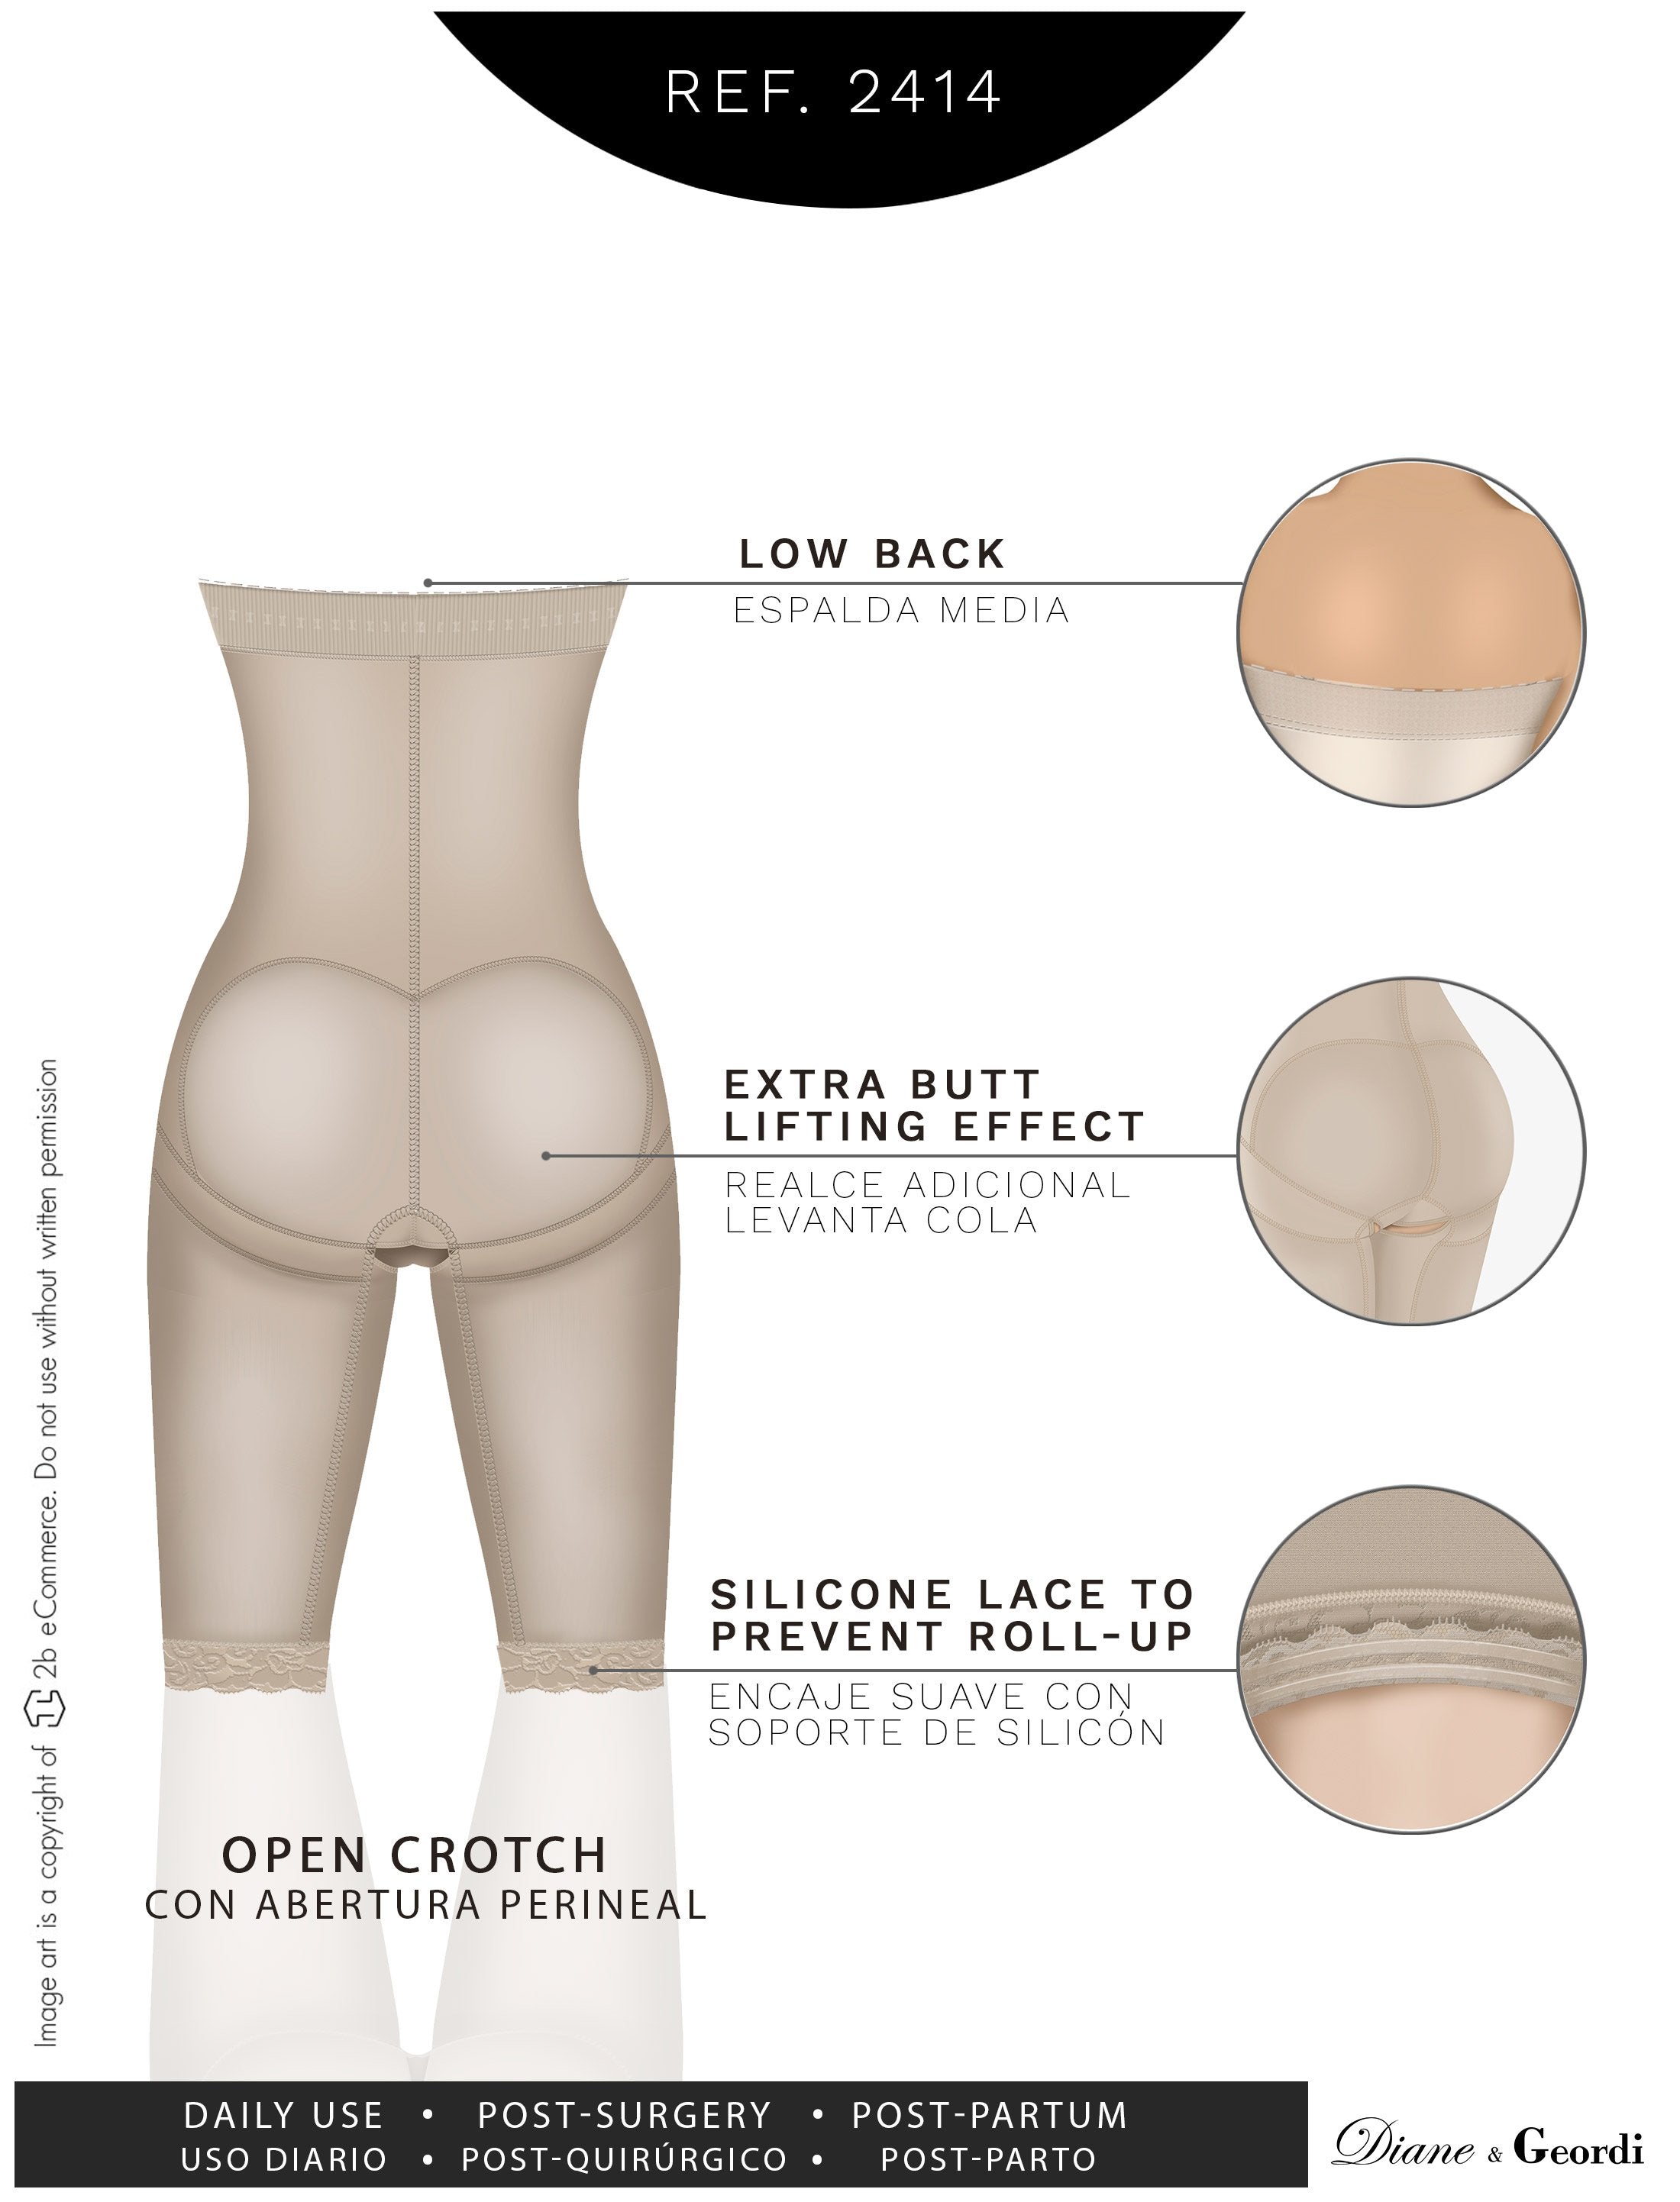 Lady Slim - Slimming Butt Lifter Girdle, Faja Butt Lifting Shapewear with  Tummy Control, Compression Garment with Hook and Eye Closures, High Waist  Shapewear Made of Powernet Material, Beige, 2XS at